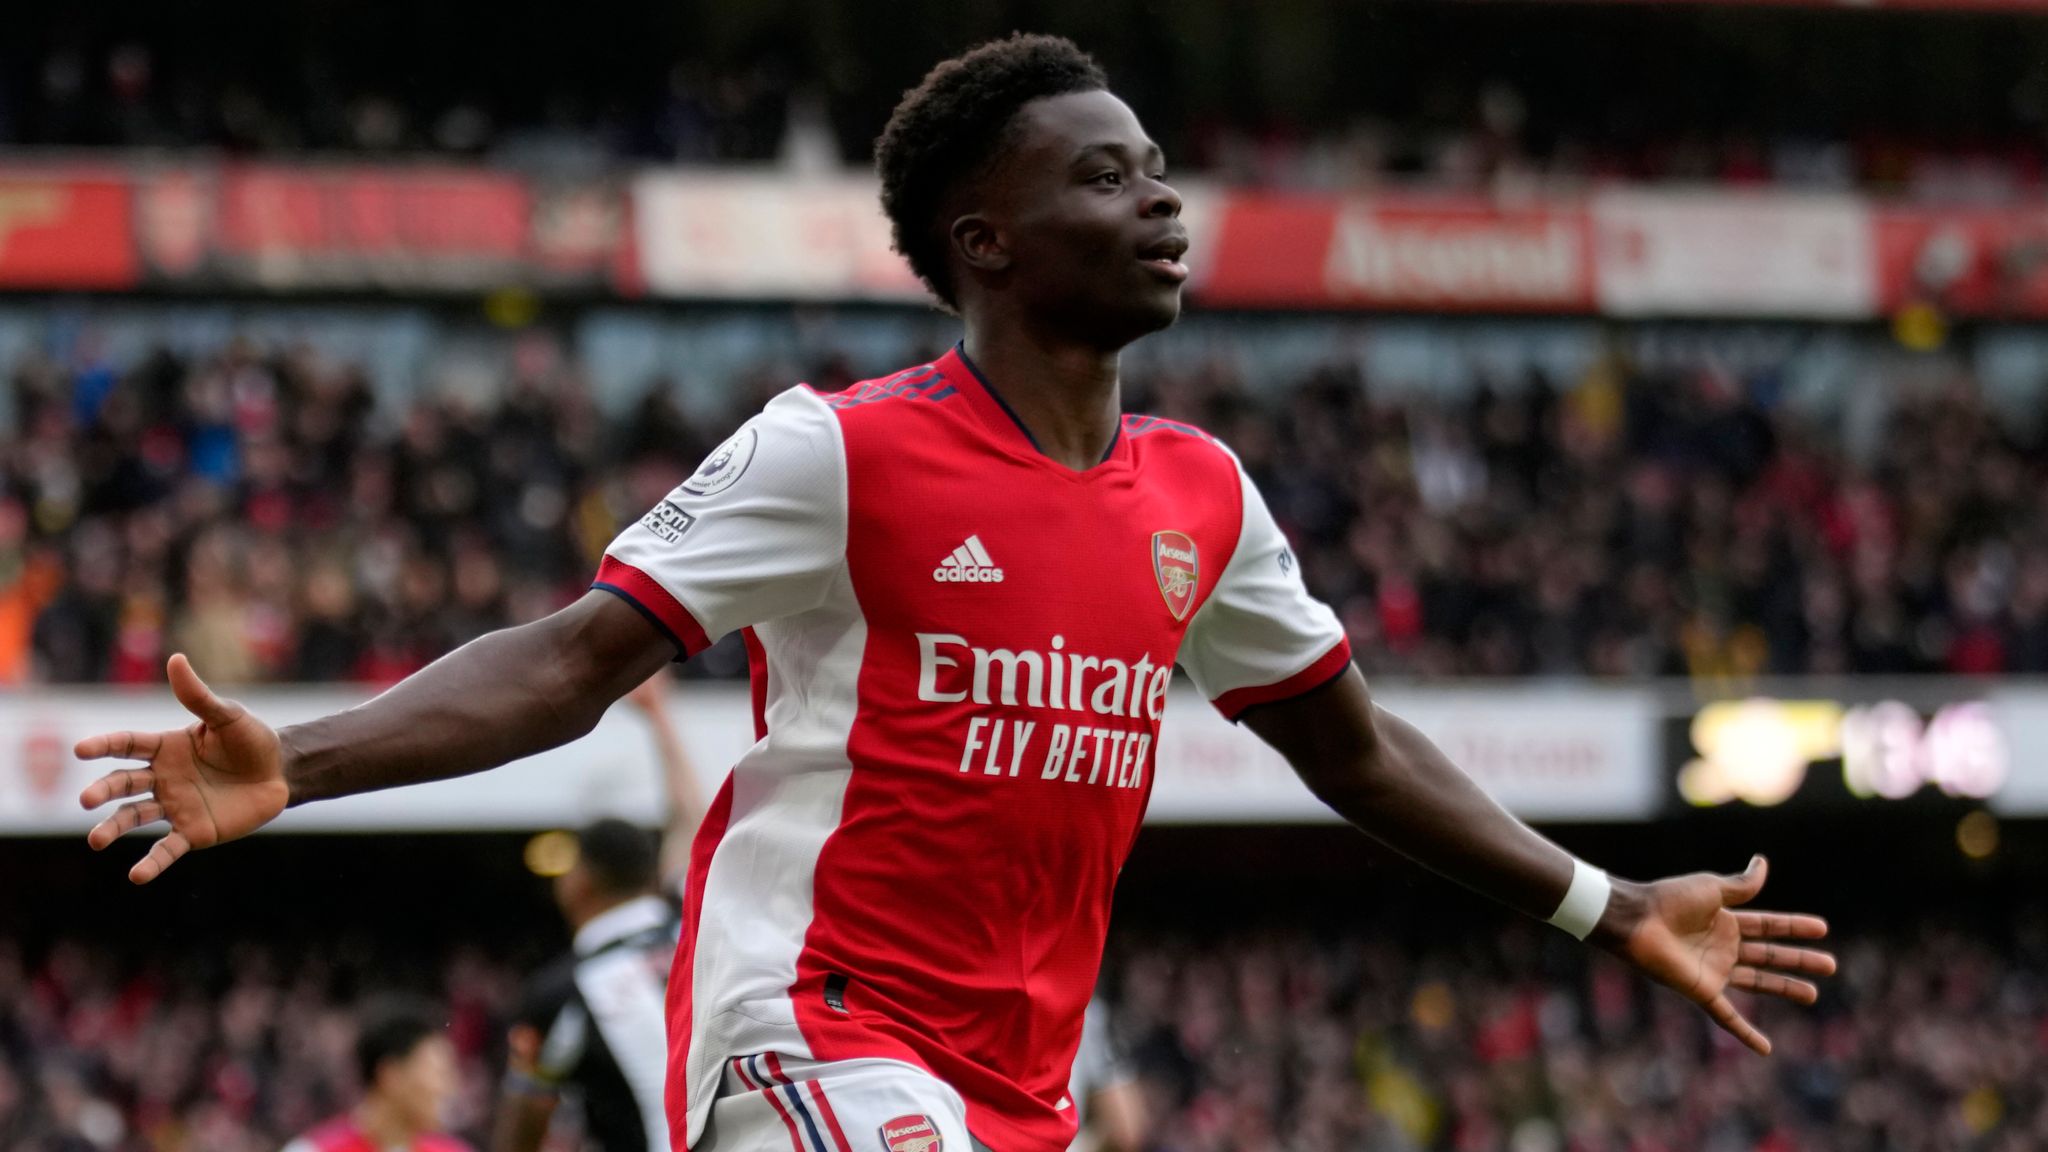 Arsenal's Bukayo Saka says heart was always set on joining Gunners as youngster despite Tottenham trial